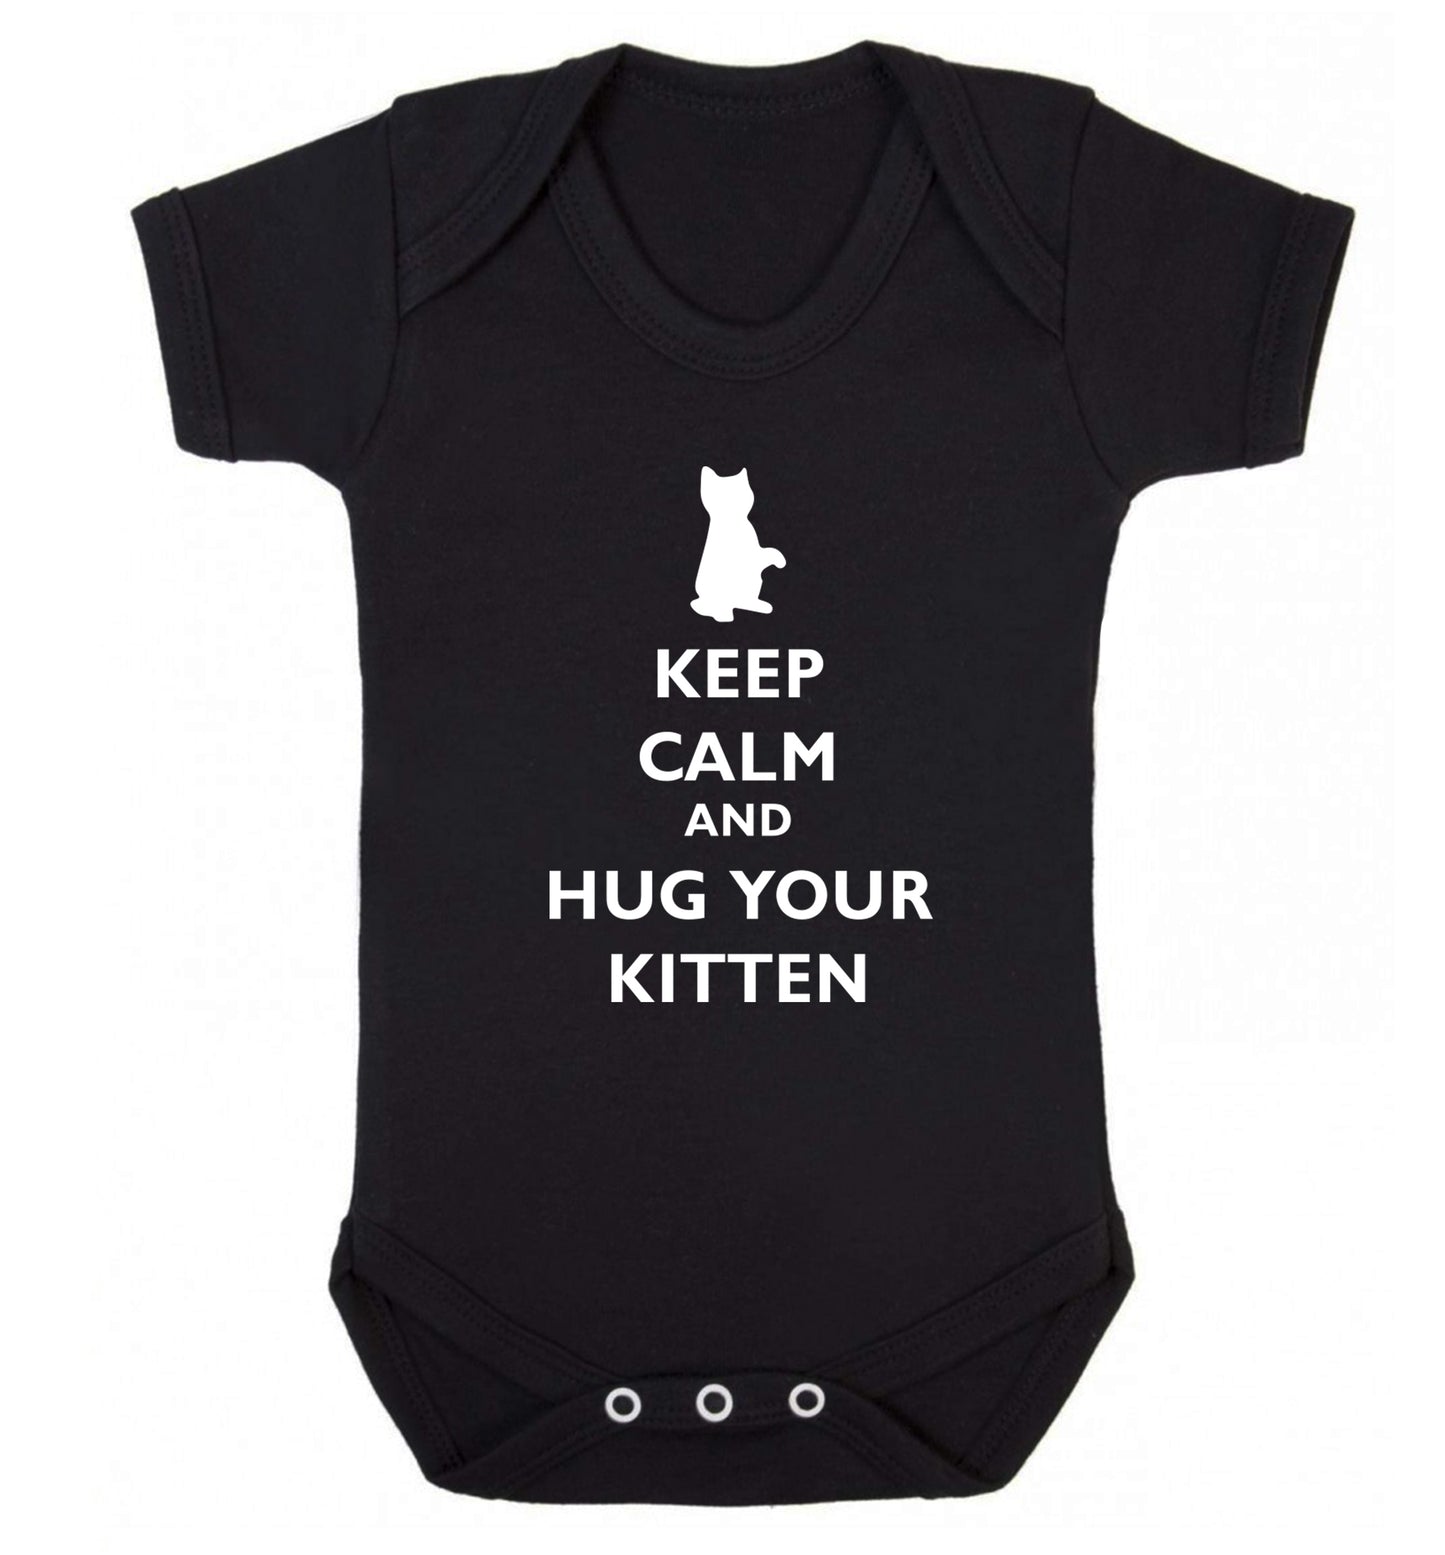 Keep calm and hug your kitten Baby Vest black 18-24 months